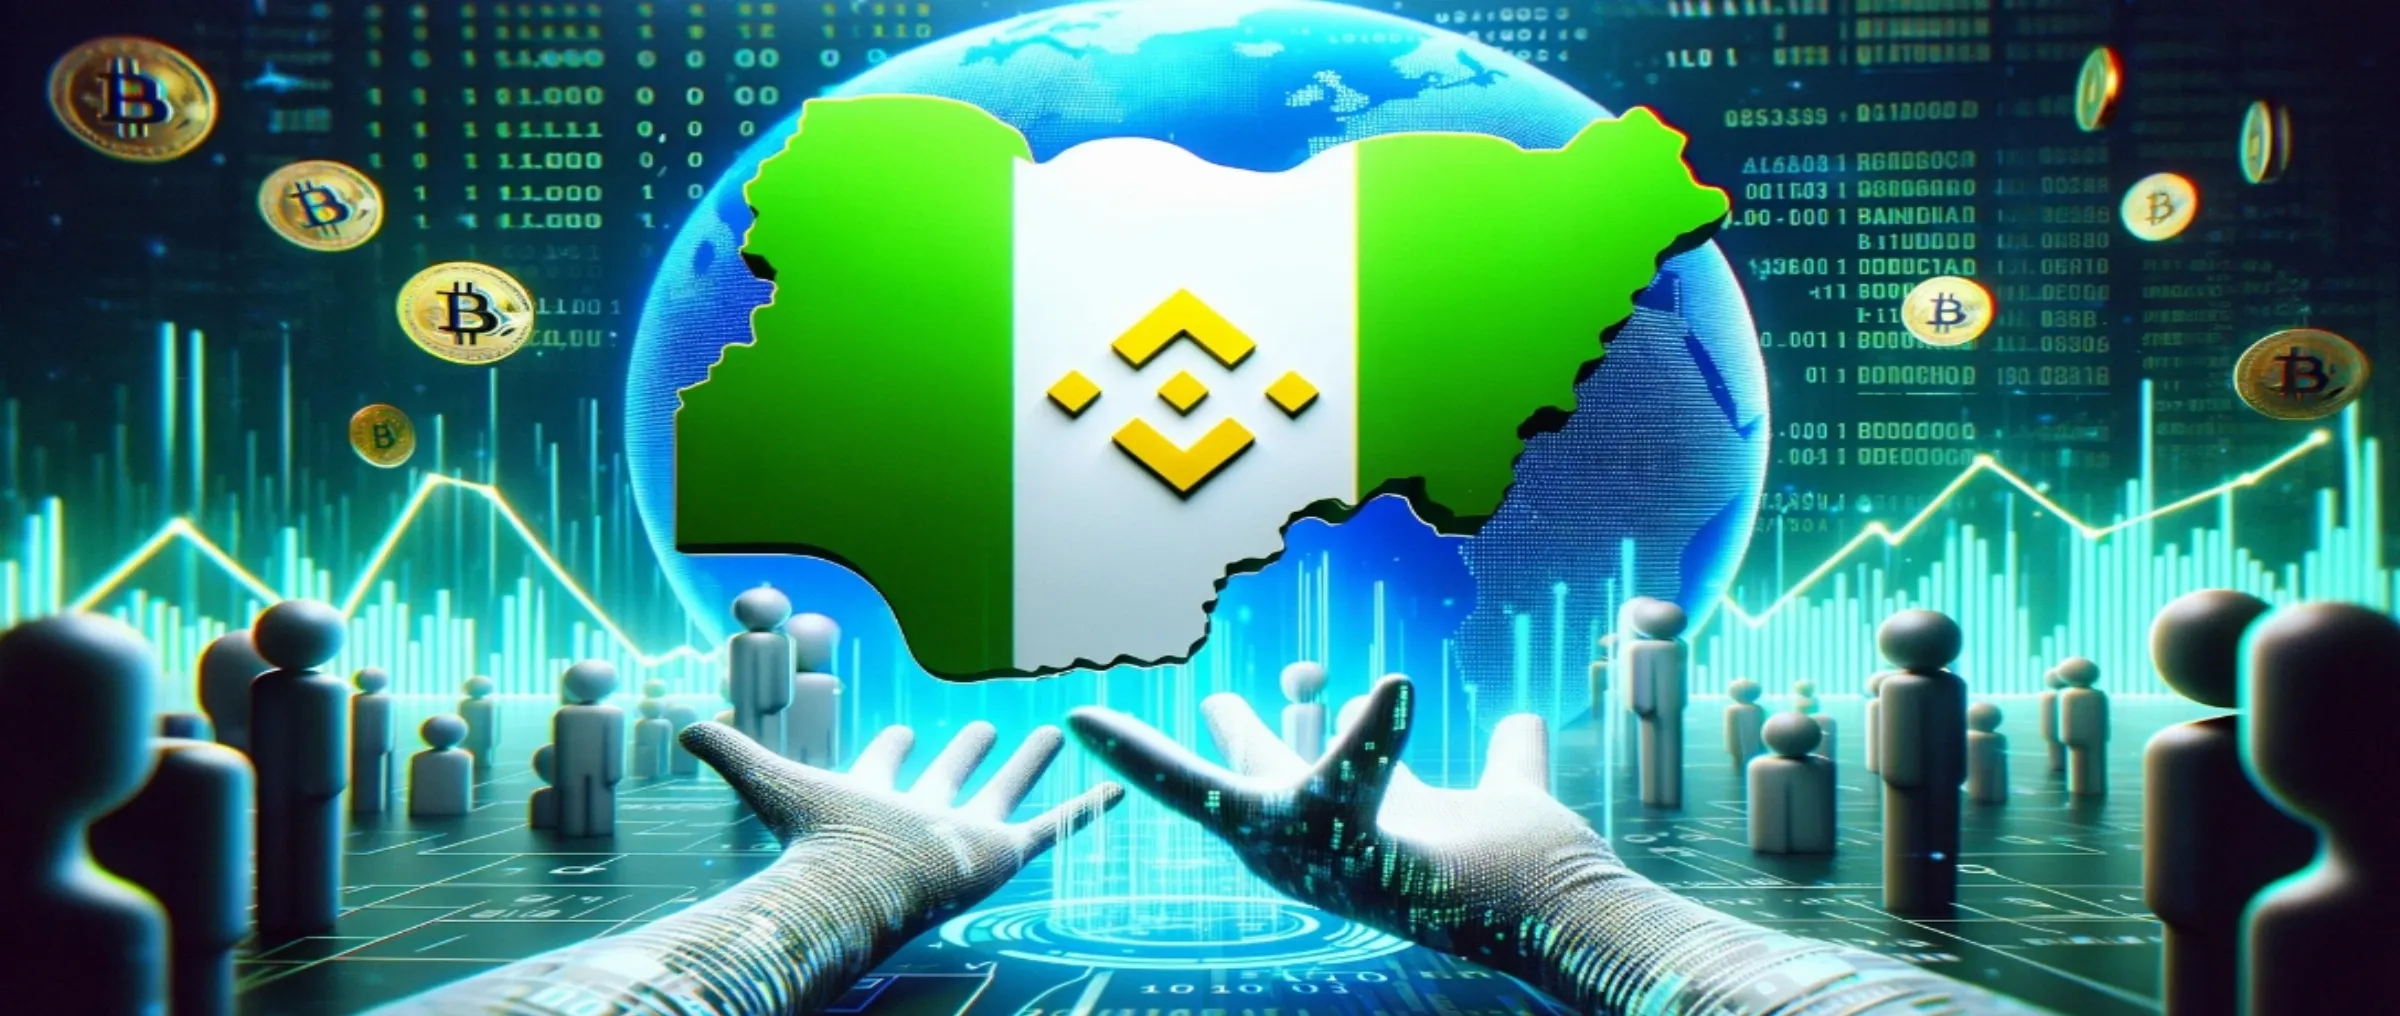 Nigeria has requested Binance to provide transaction data for the past six months